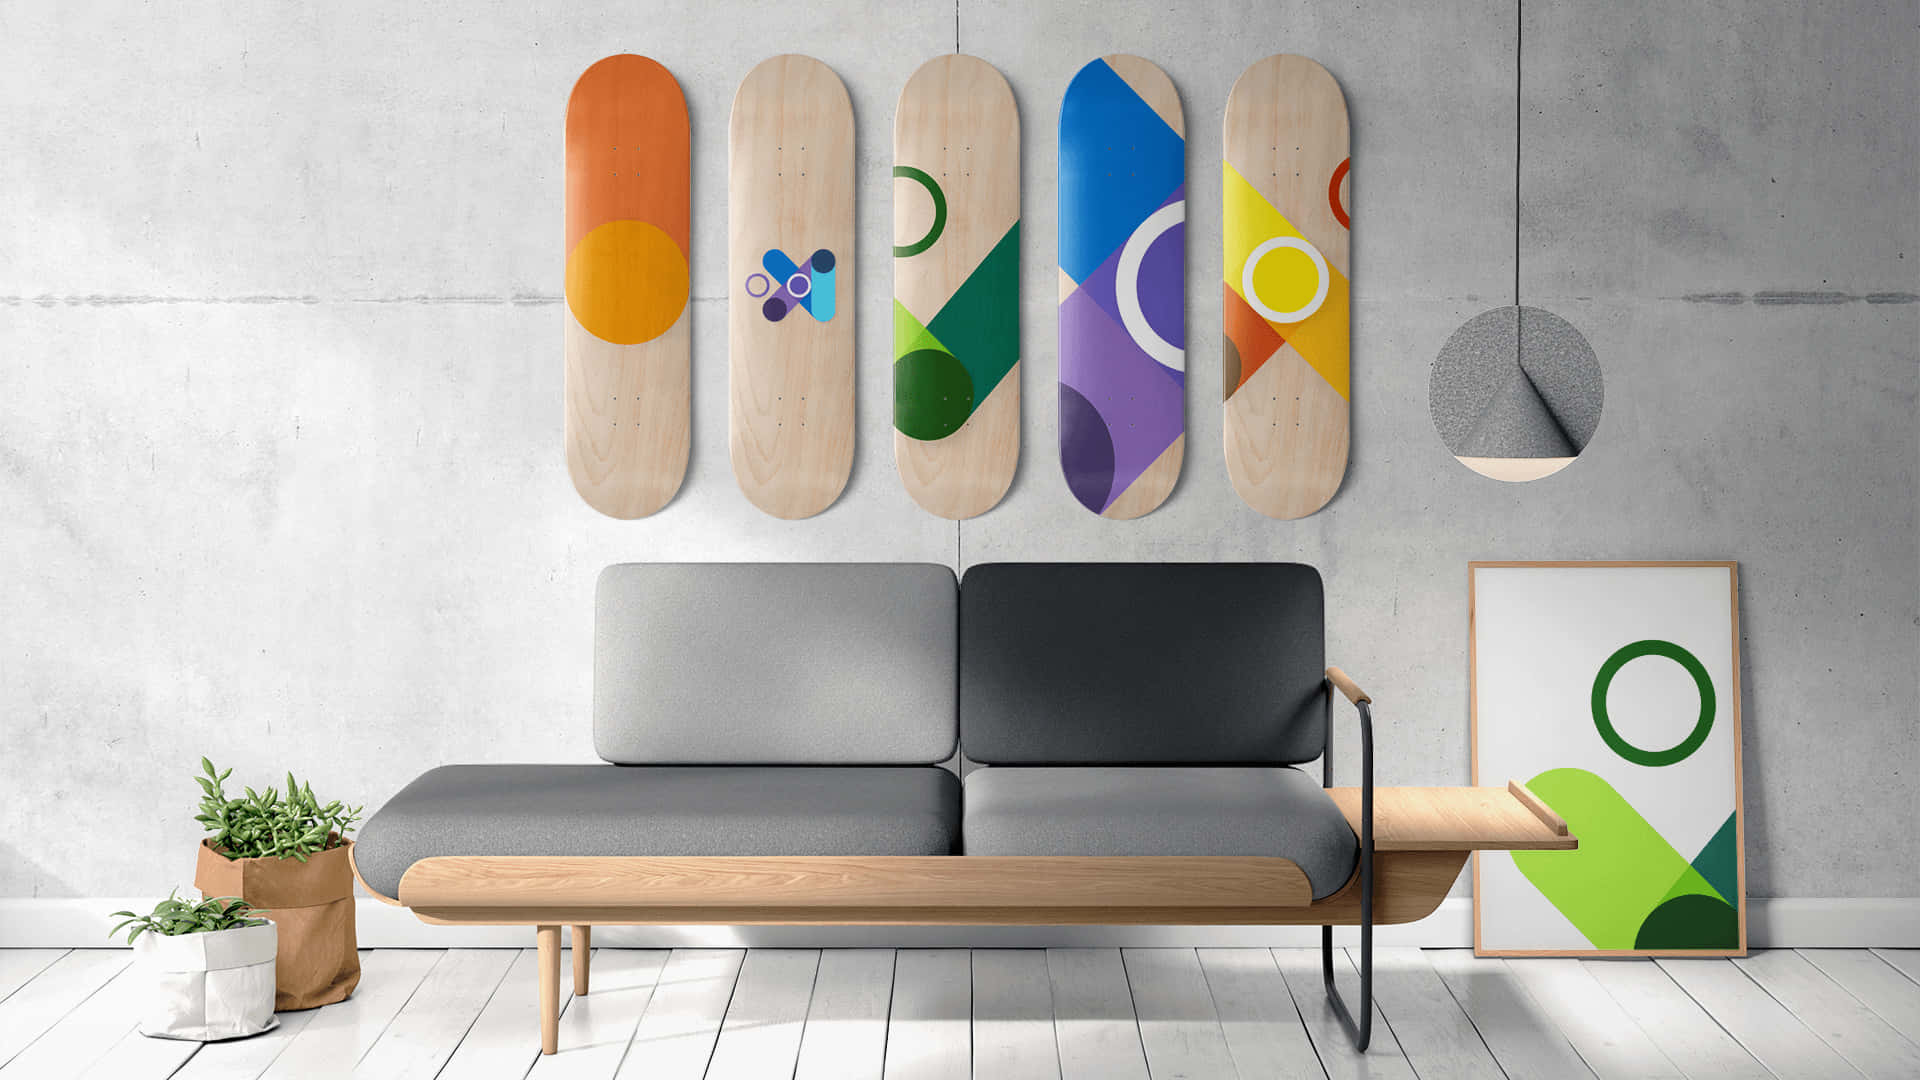 A Couch And A Wall With Skateboards